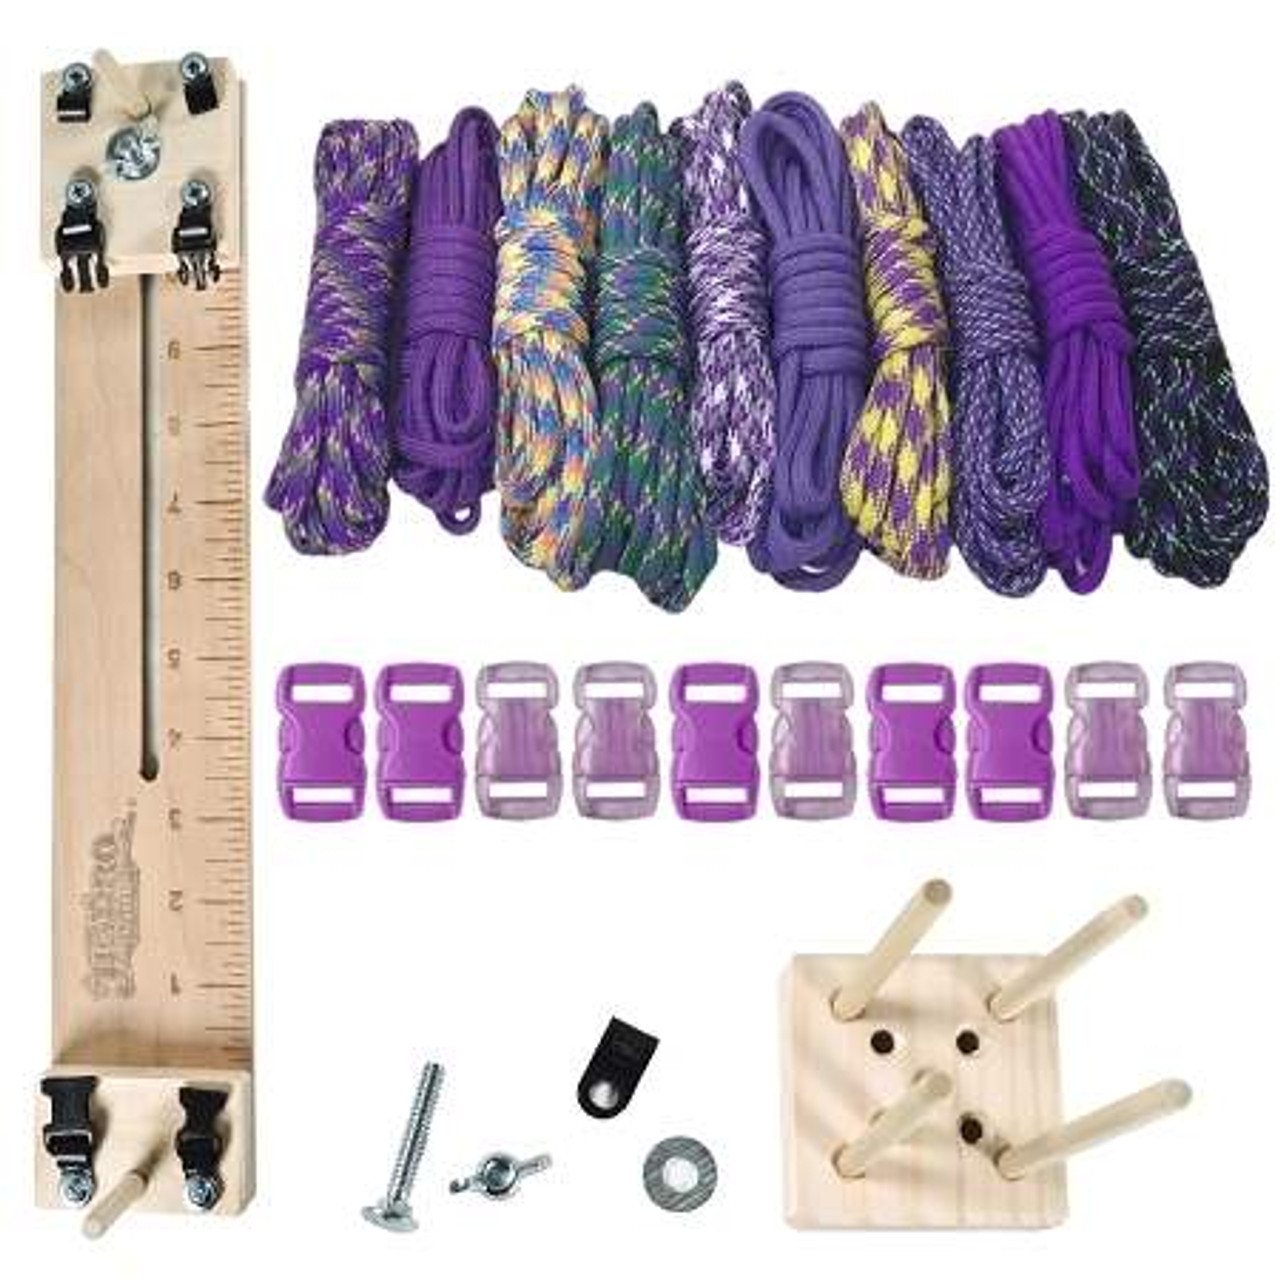 Paracord Crafting Kit w/ Pocket Pro Jig & Monkey Form - Primary